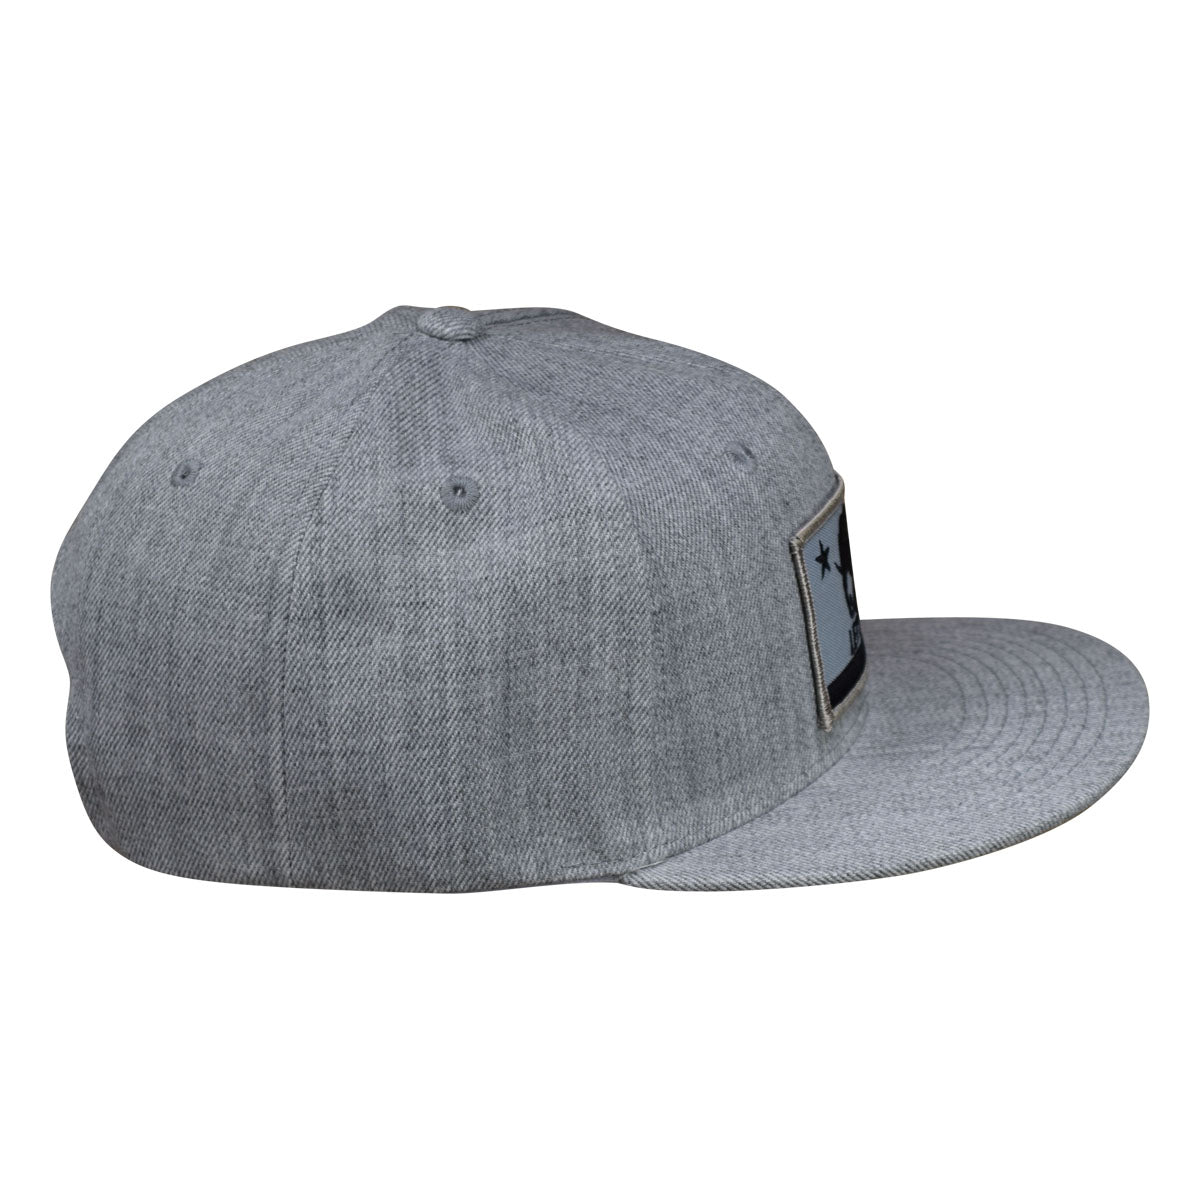 LET'S BE IRIE Snapback Hat - California Irie Flag, Heather Gray - Let's Be Irie™